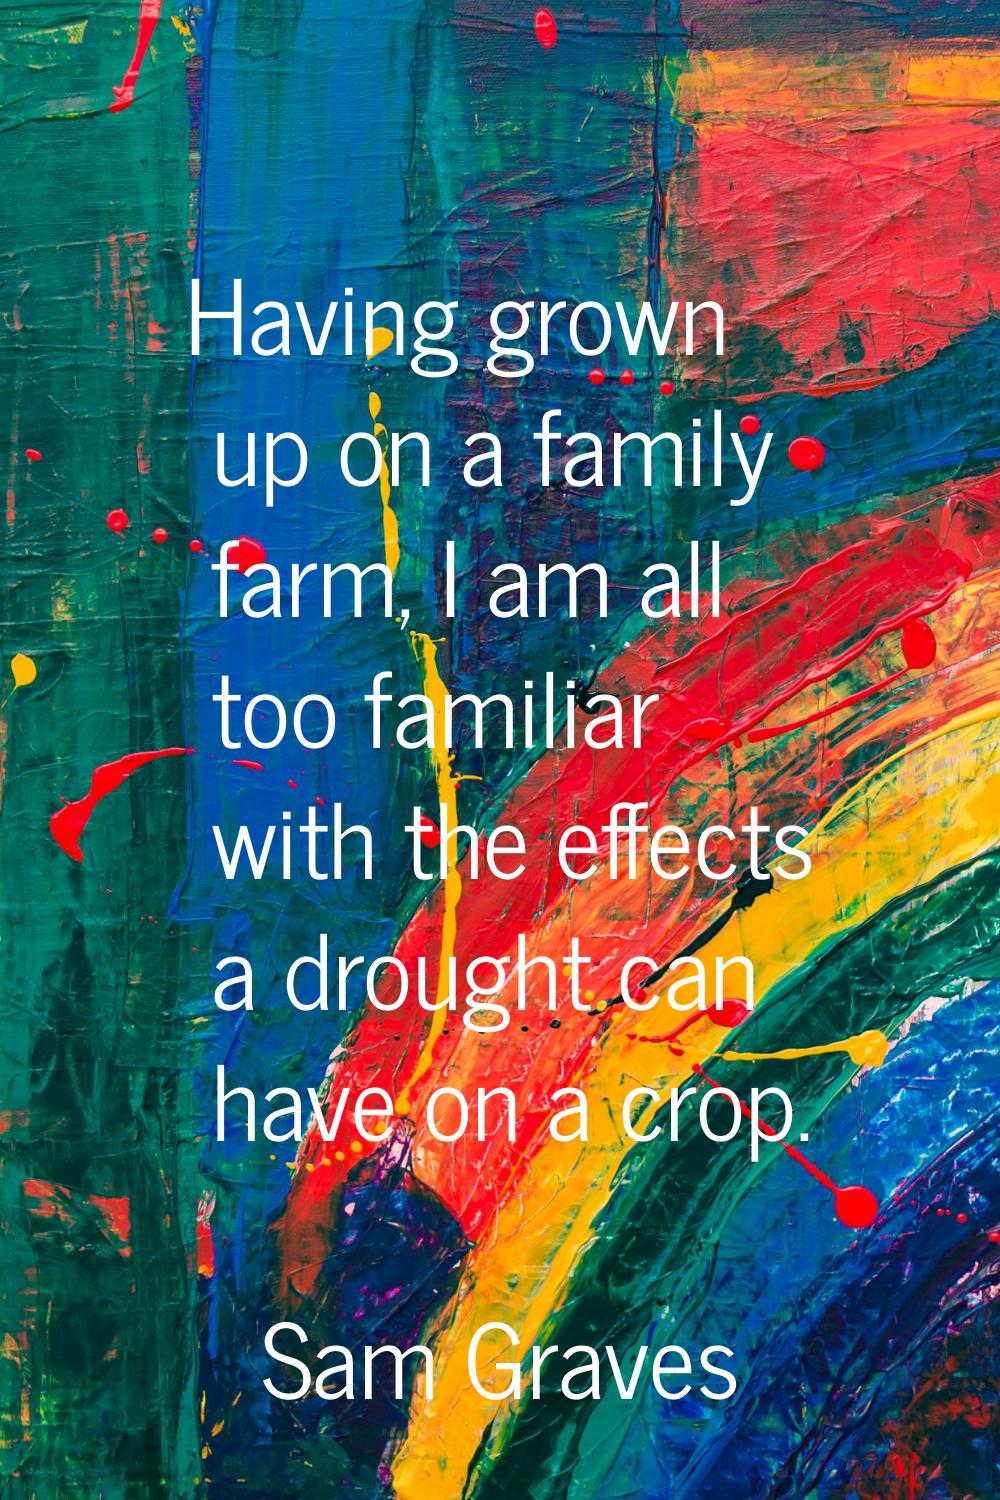 Having grown up on a family farm, I am all too familiar with the effects a drought can have on a cr